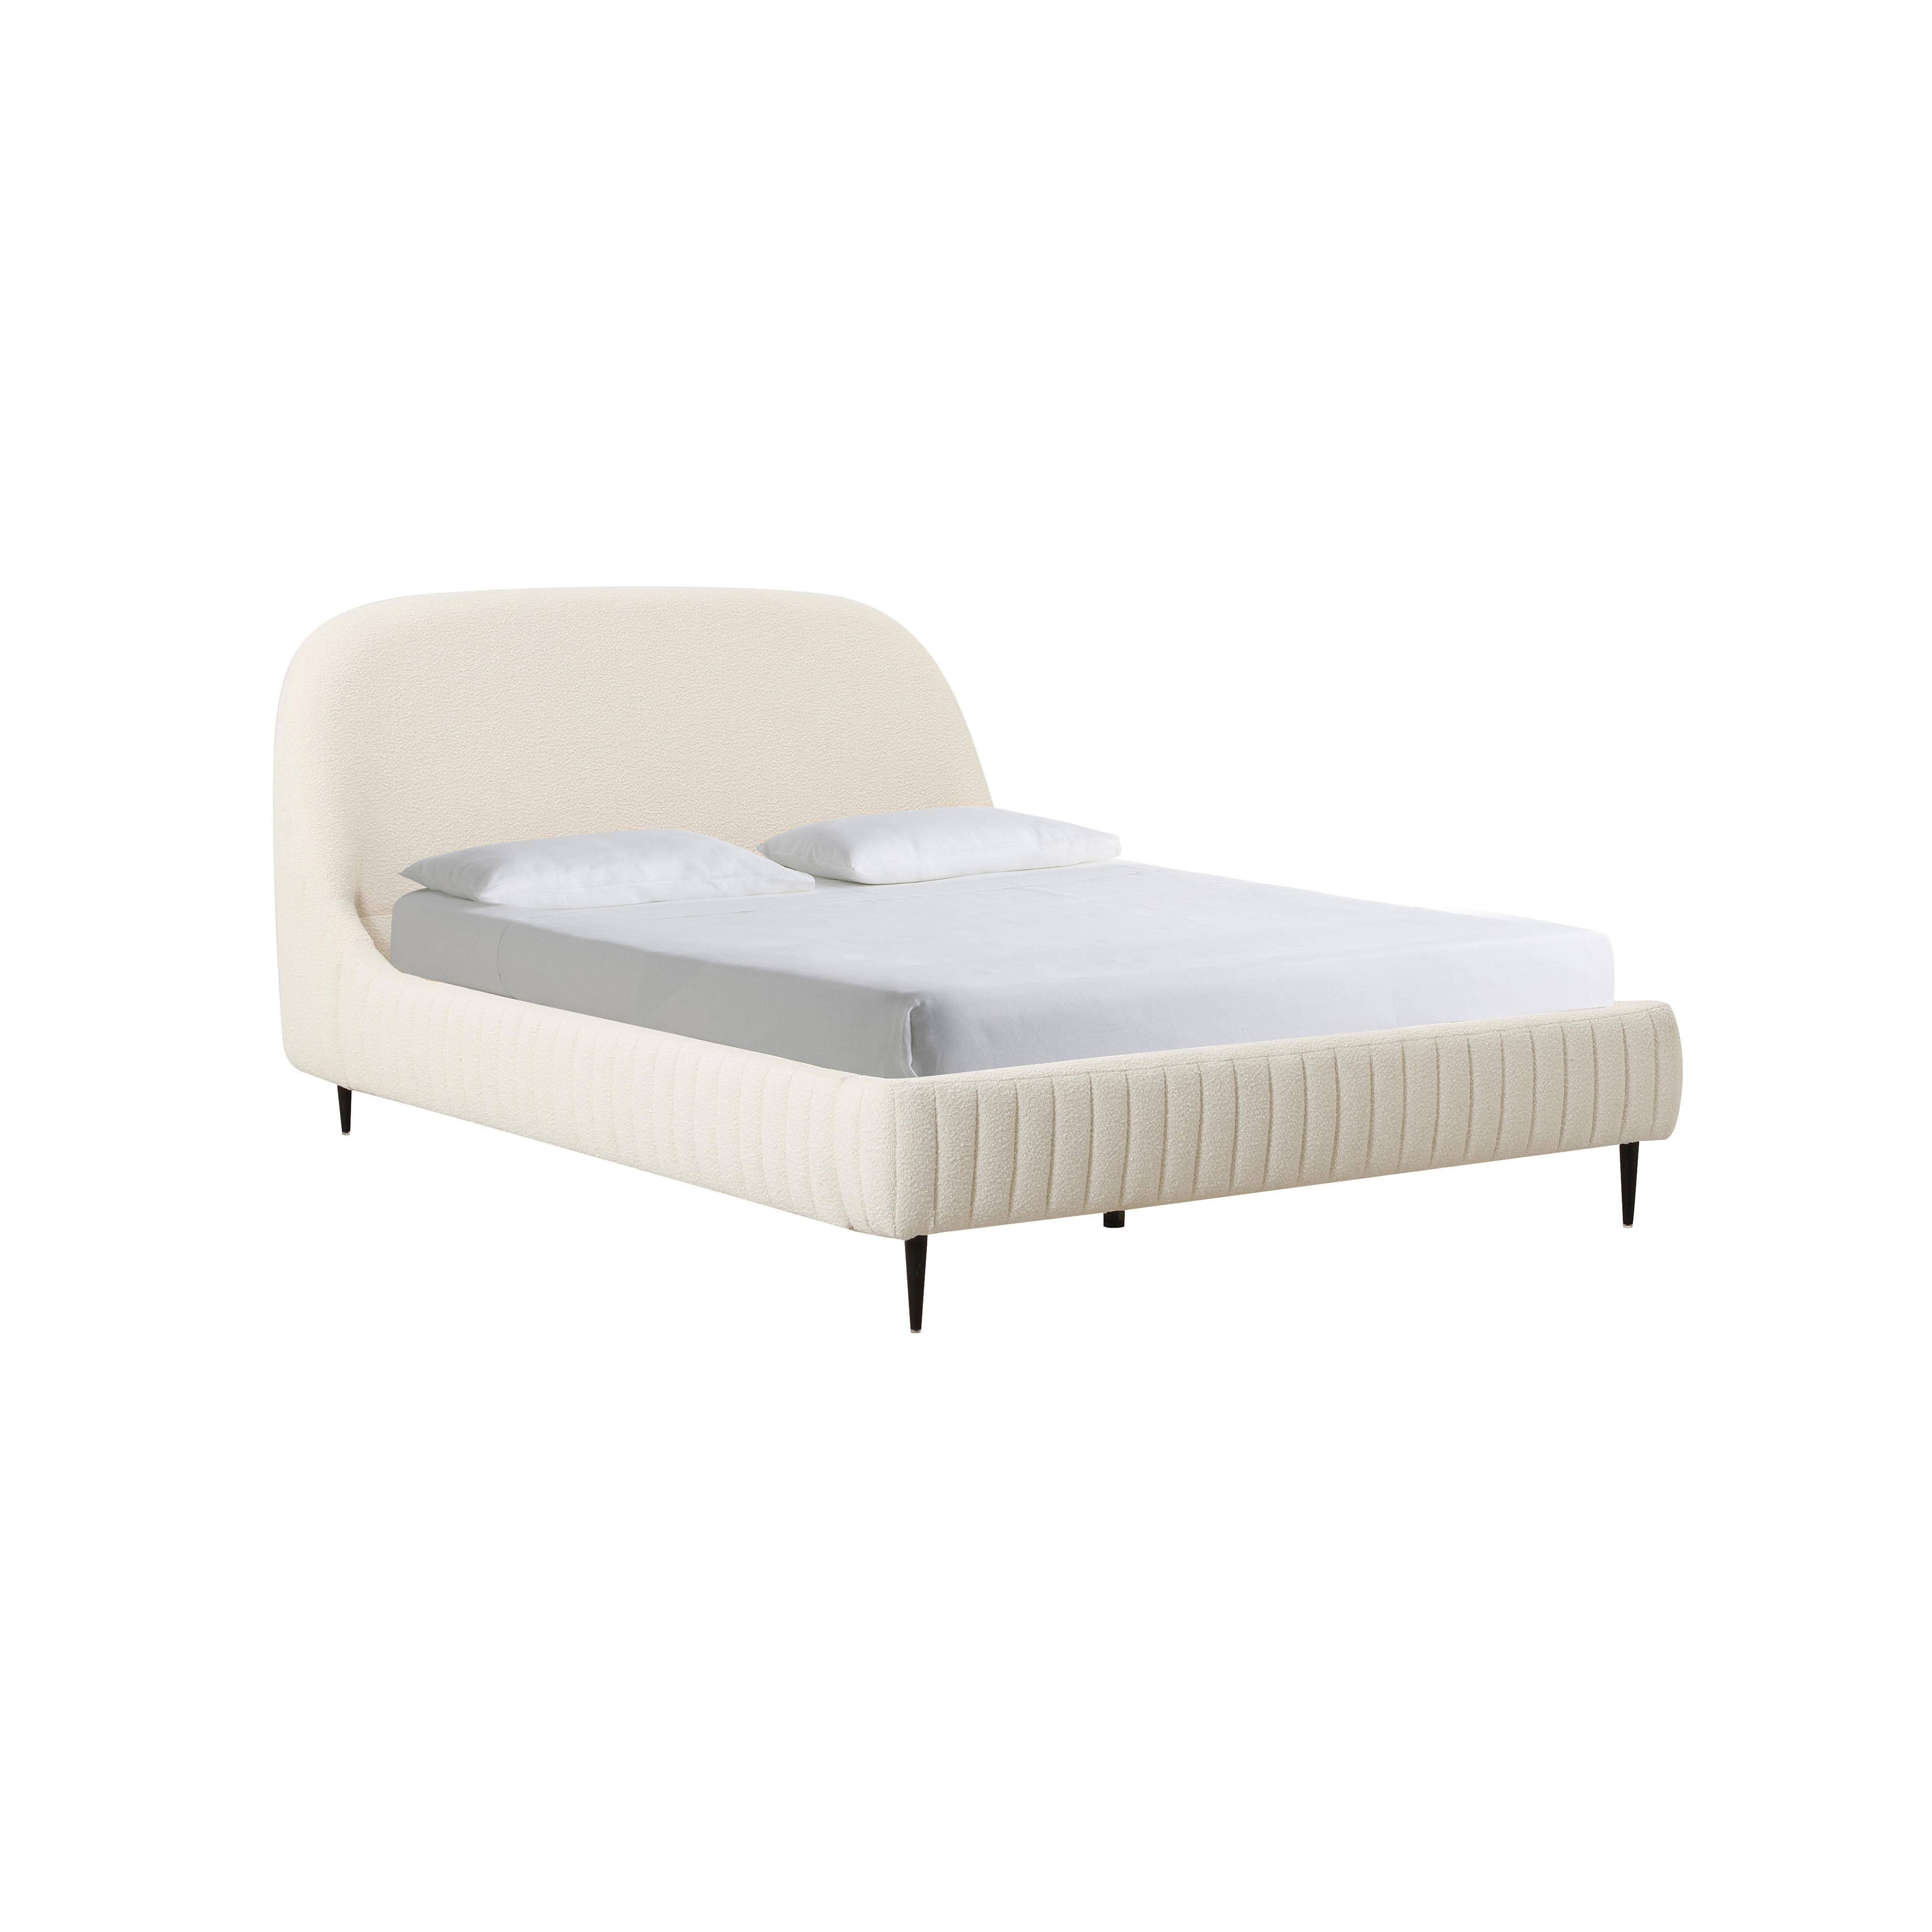 Tov Furniture Beds - Denise Cream Boucle Bed in King